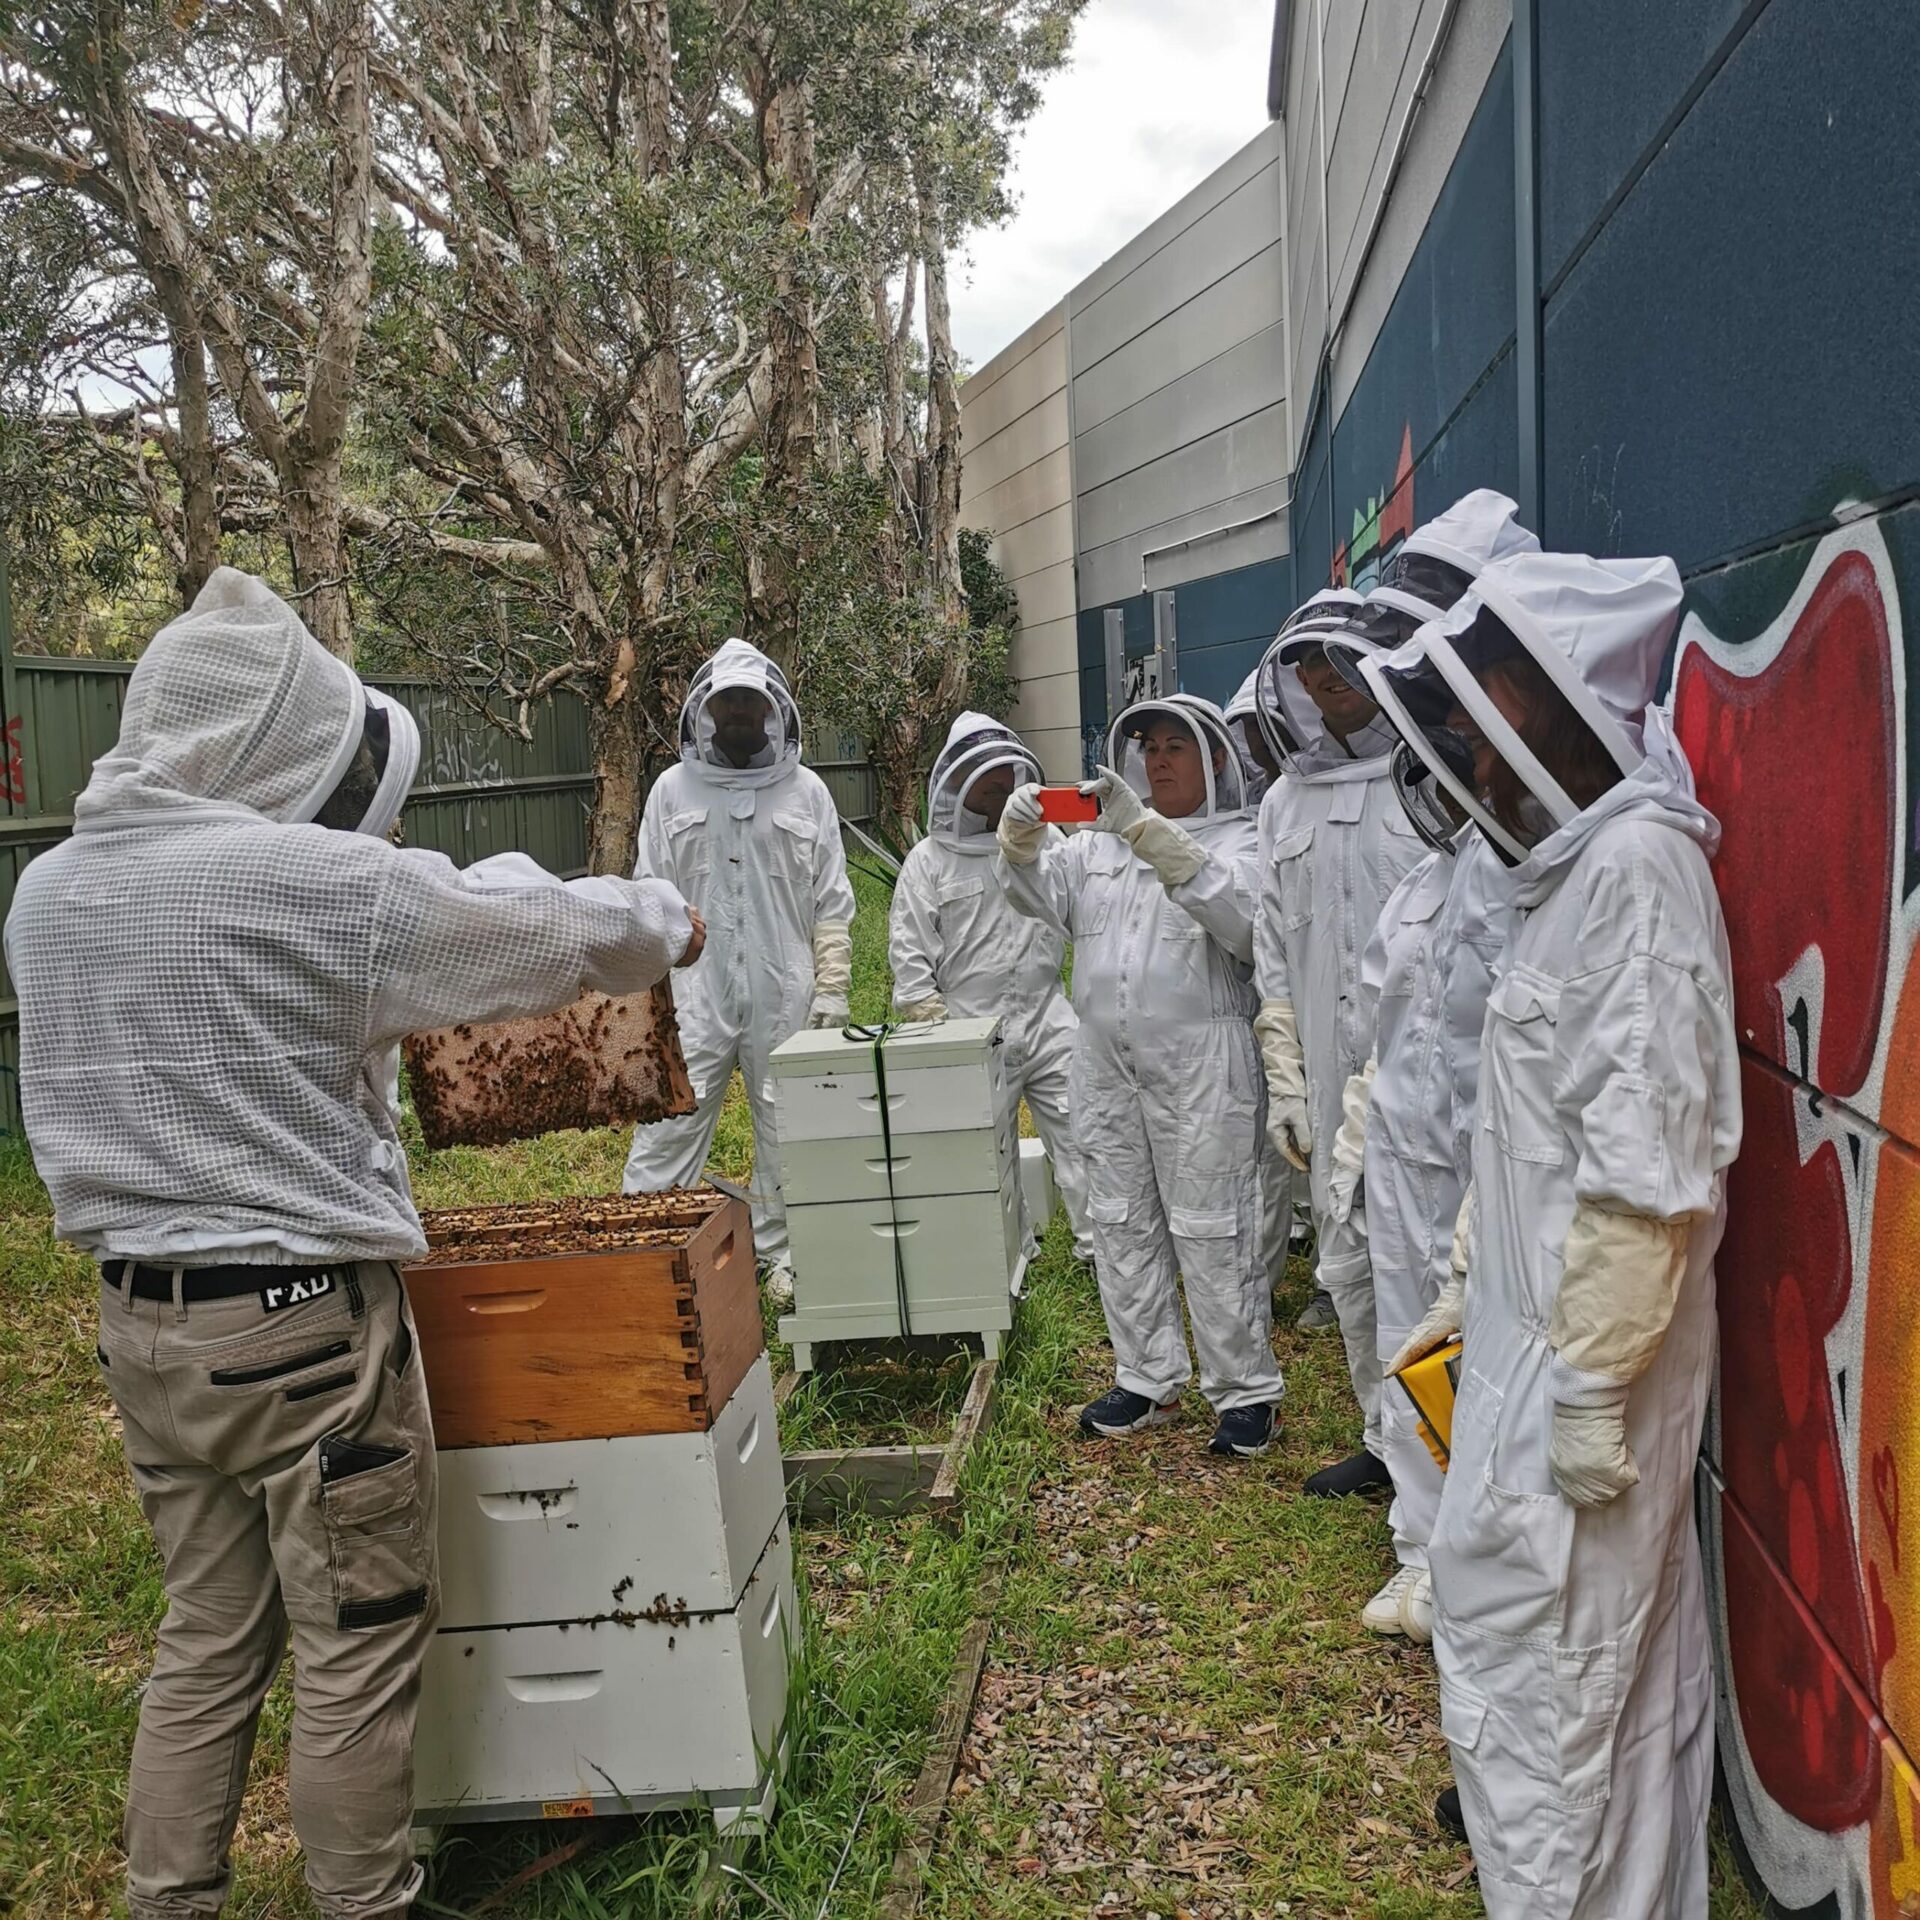 Beekeeper Doug Purdie teaches a group of apiary students on an Urban Beehive beekeeping course in Sydney